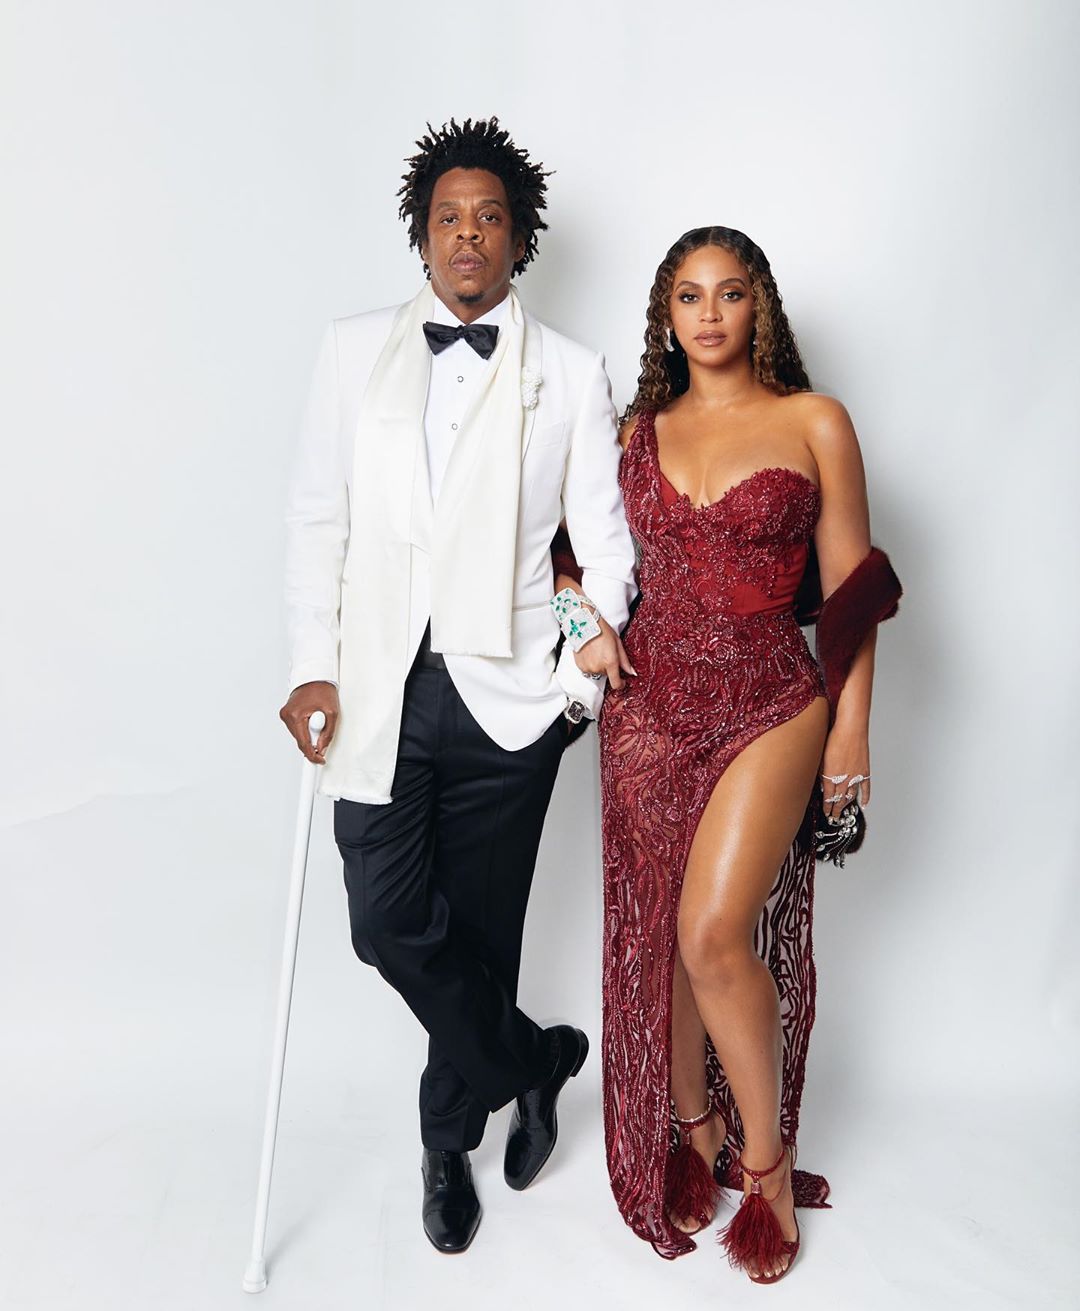 Beyonce Shows Major Leg In Red Thigh-High Slit Dress With Jay-Z